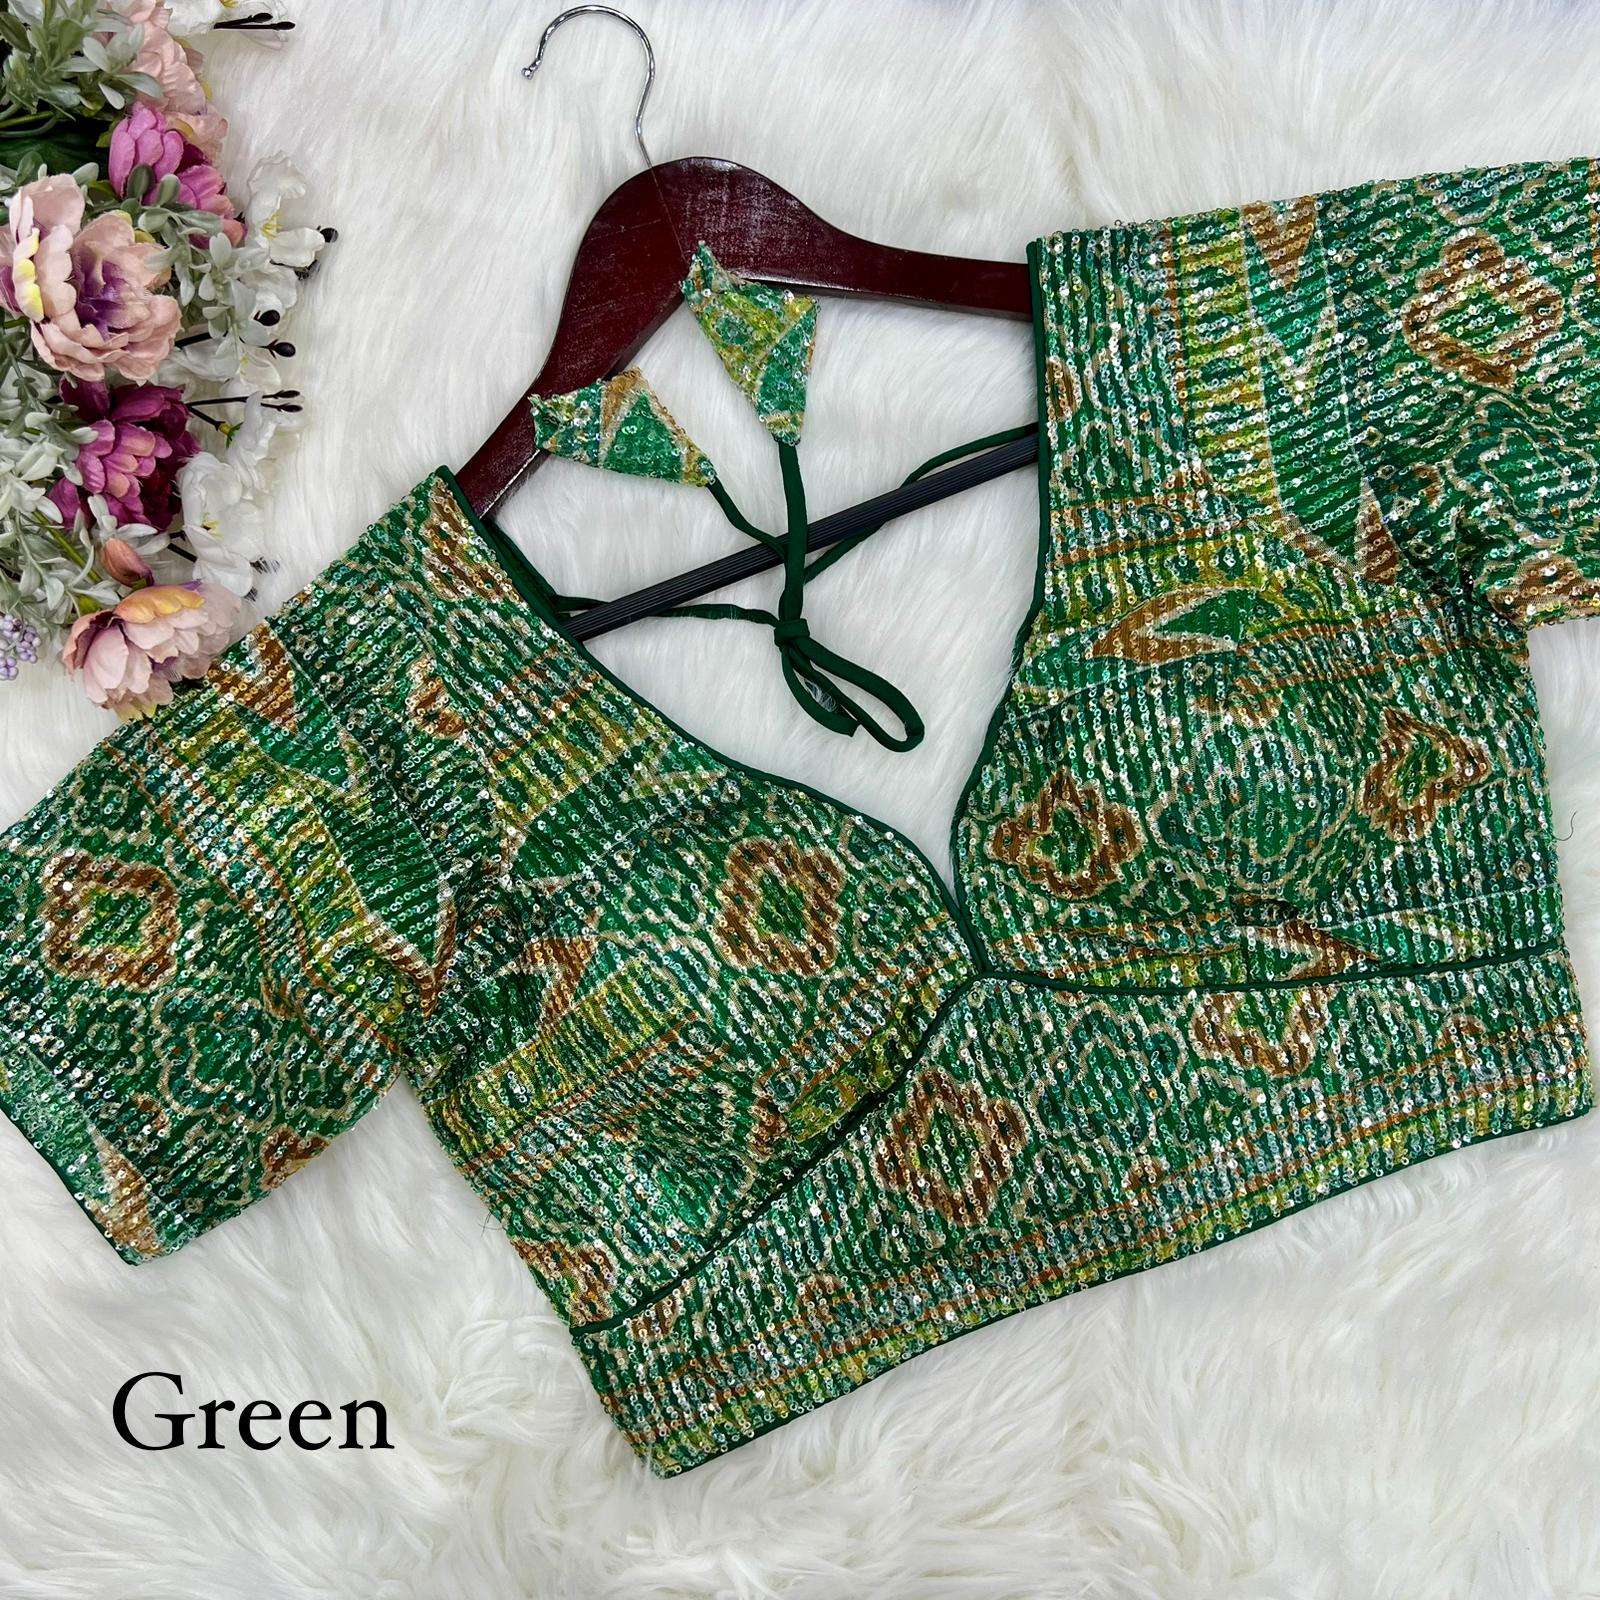 SEQUENCE EMBROIDERY WORK FANCY FESTIVAL SPECIAL STICH BLOUSE...